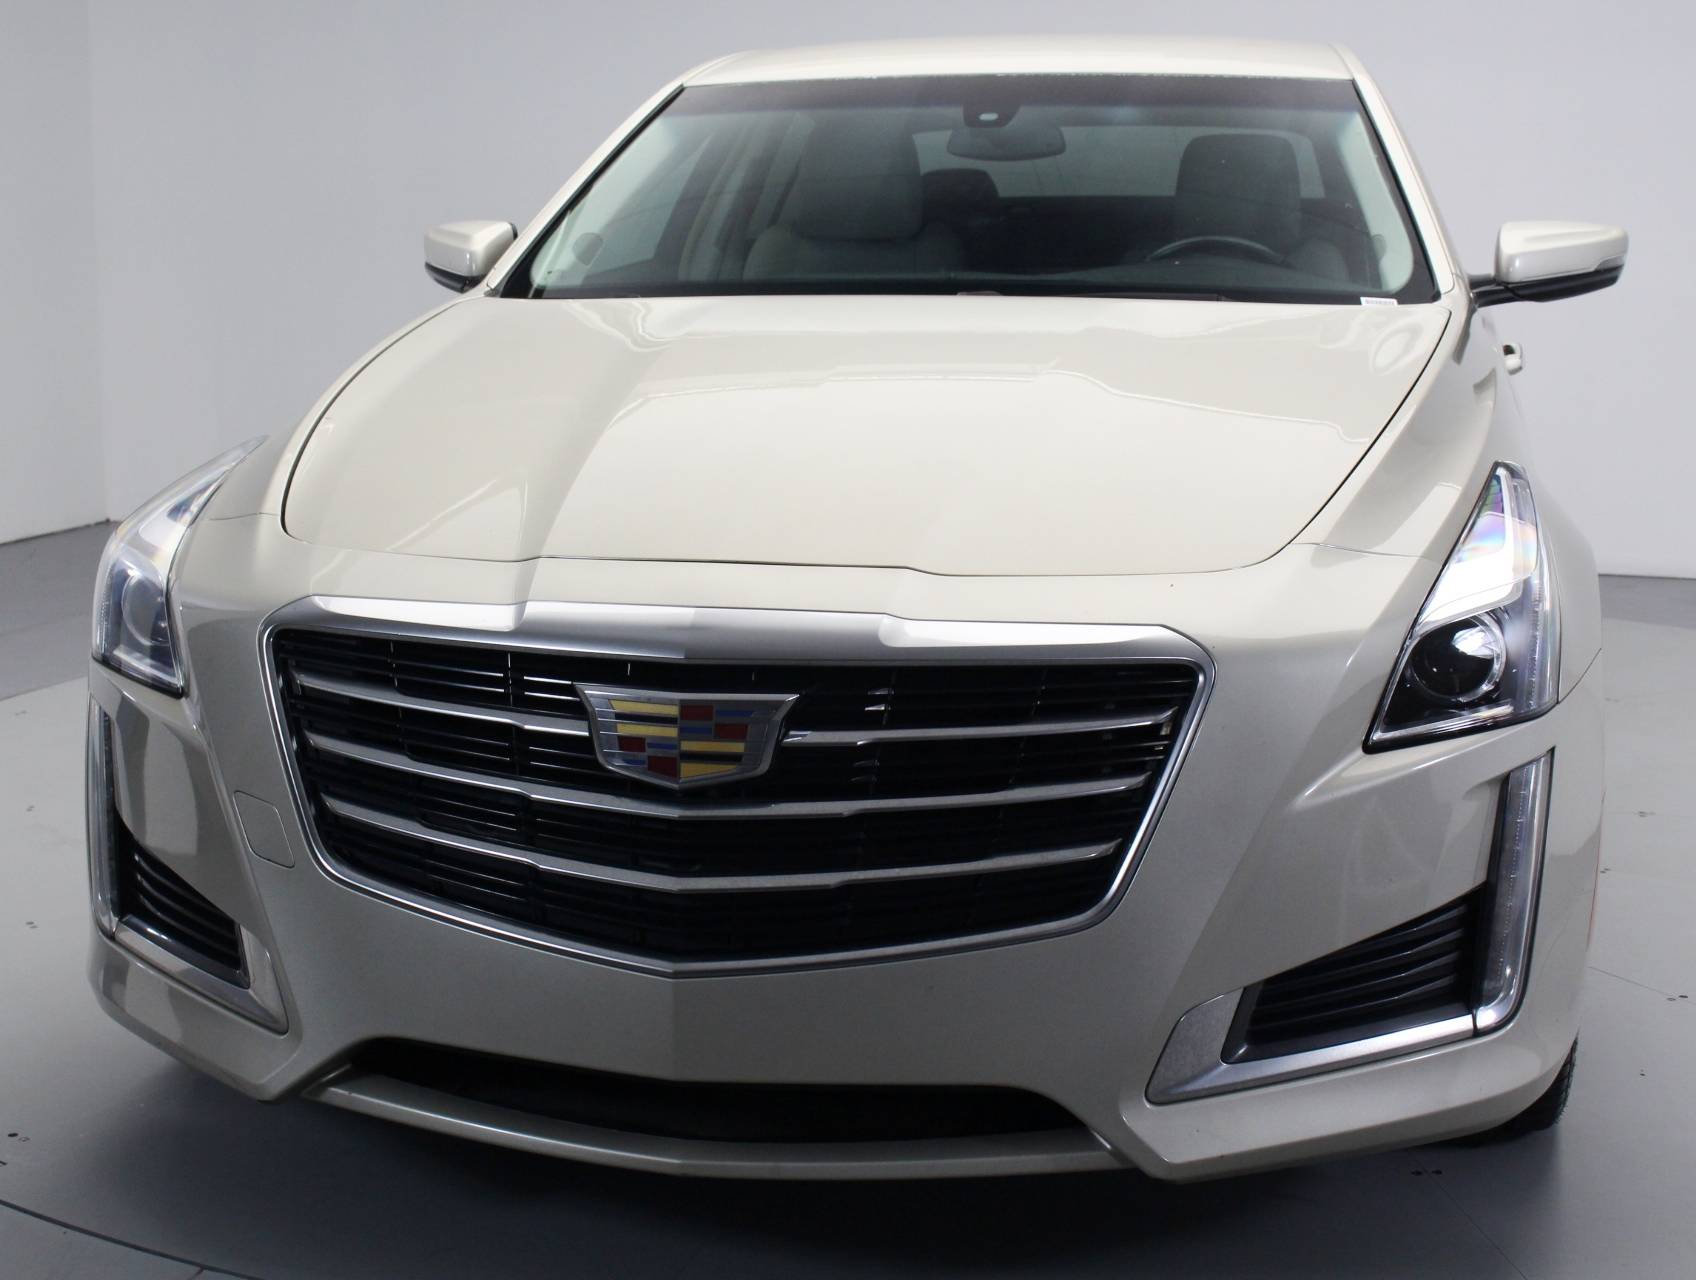 Florida Fine Cars - Used CADILLAC CTS 2015 WEST PALM 